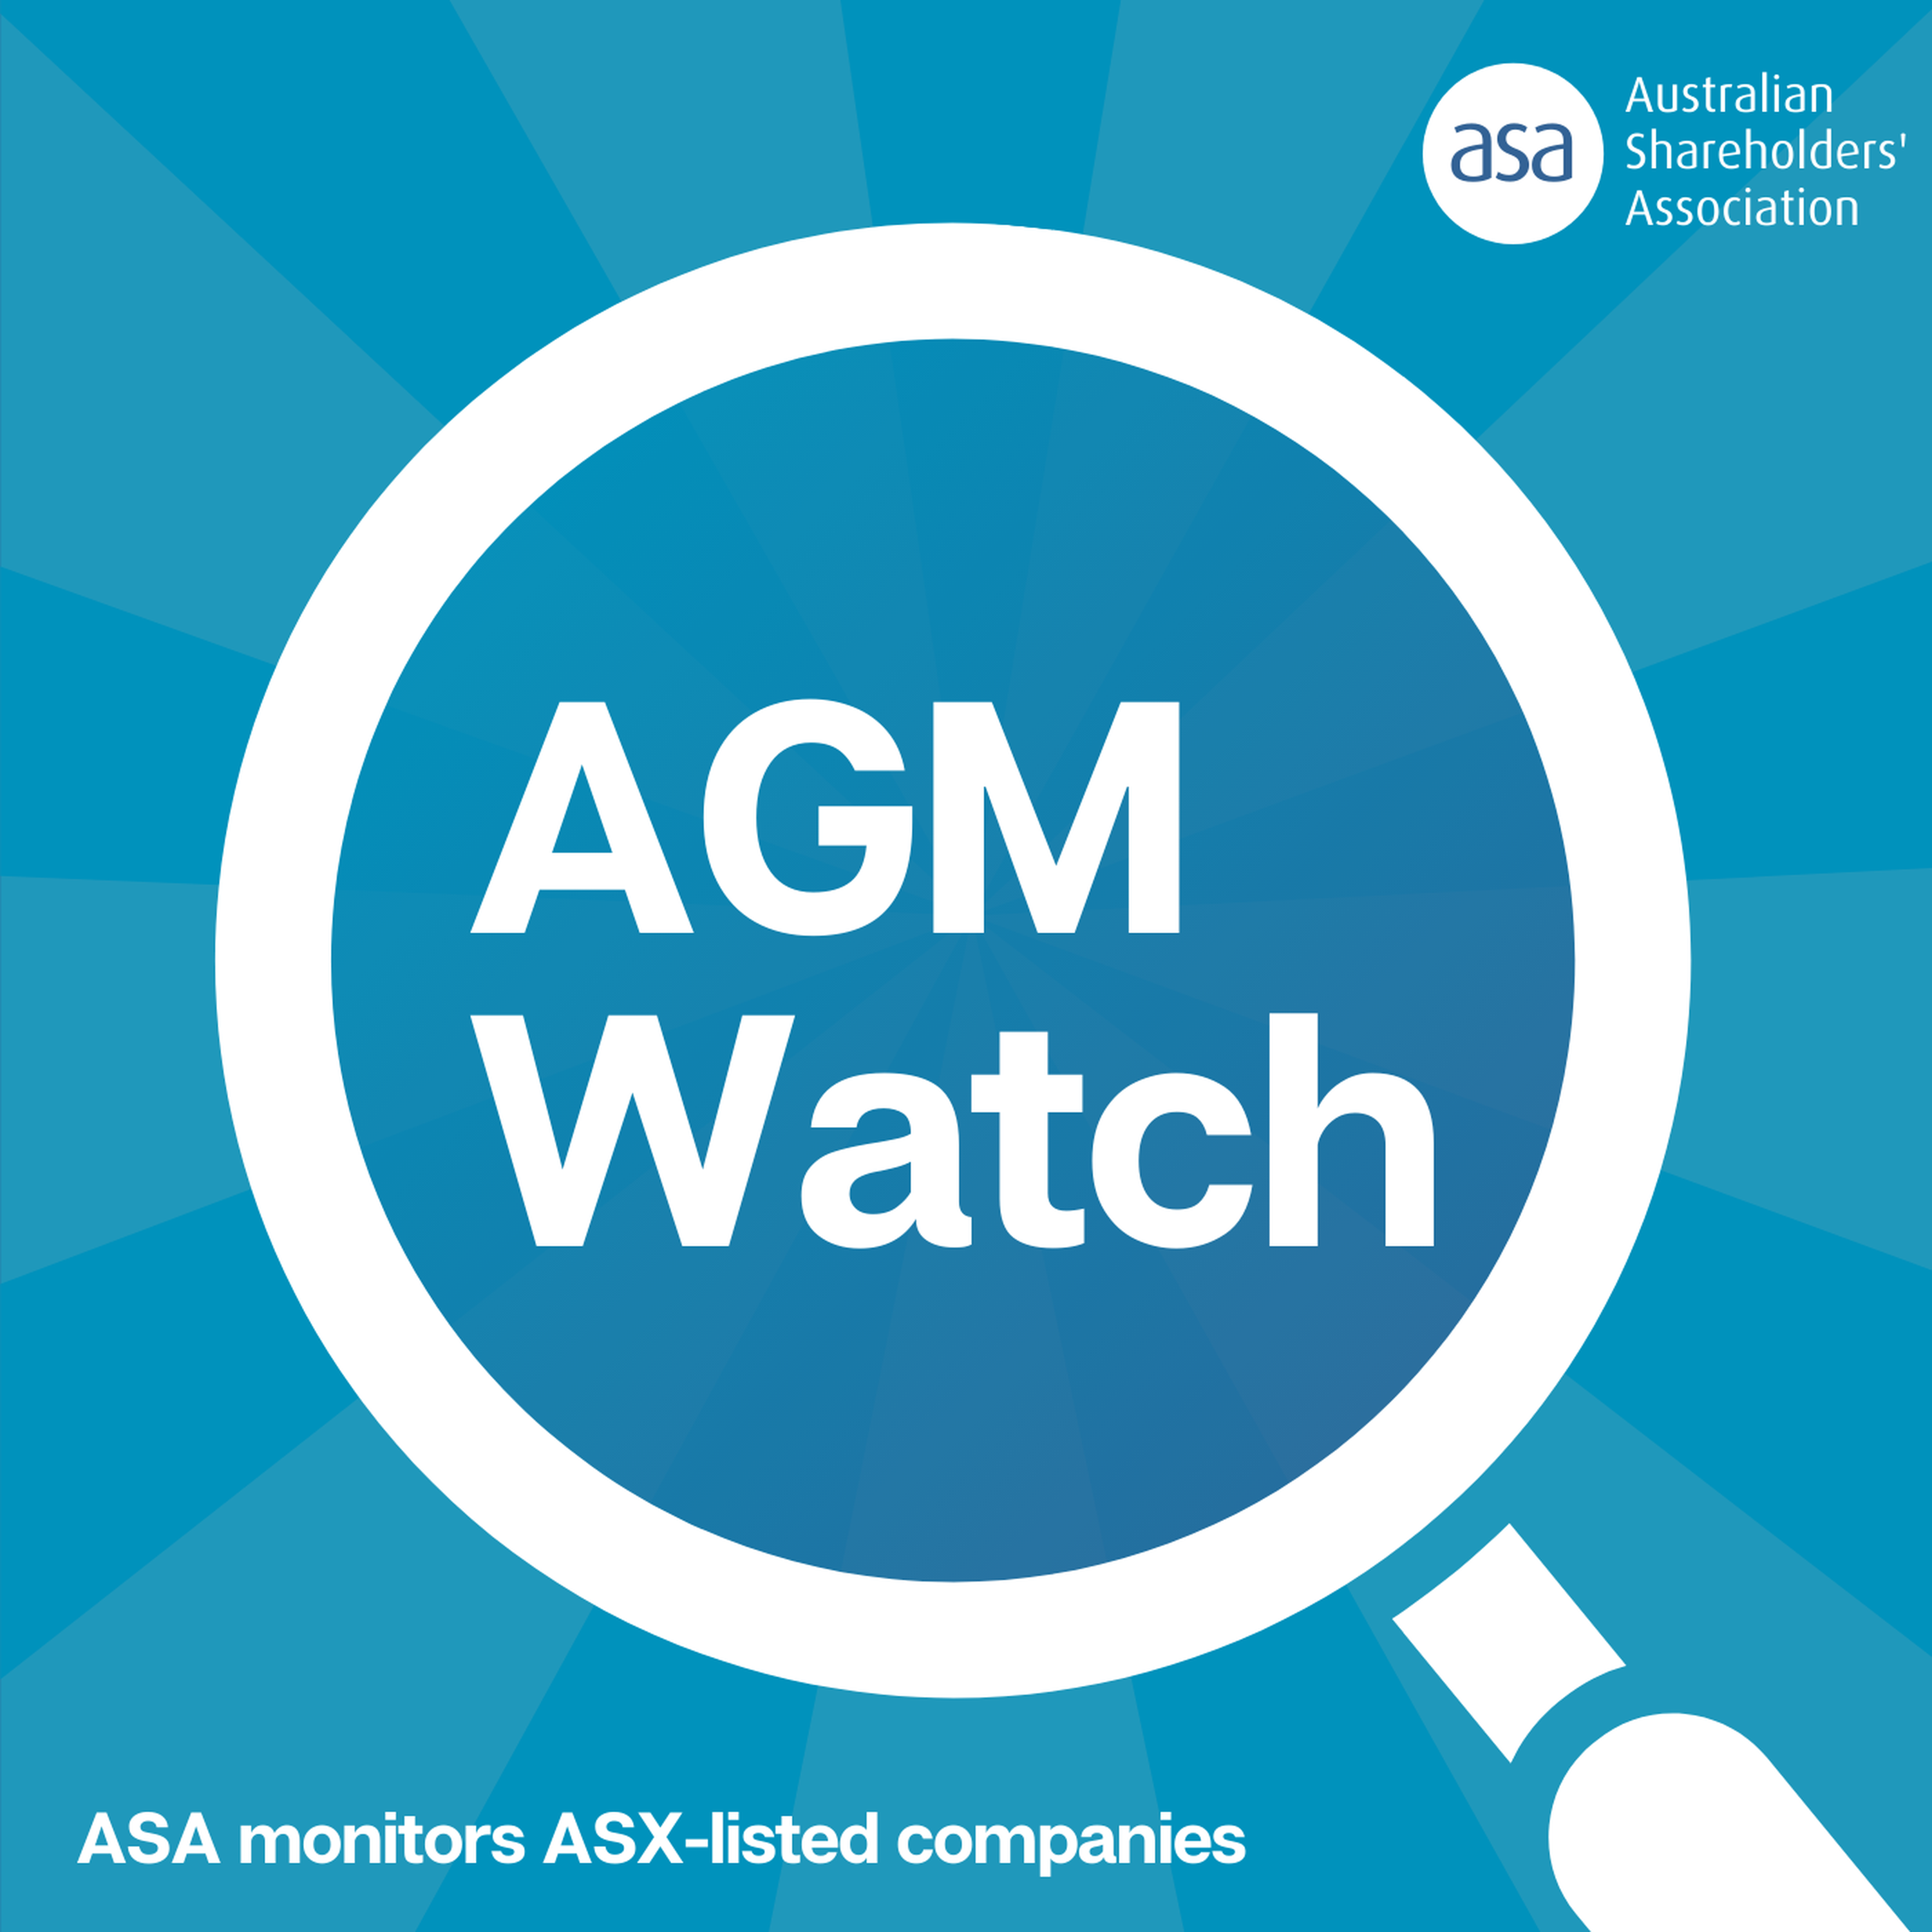 AGM Watch - Star Entertainment Group